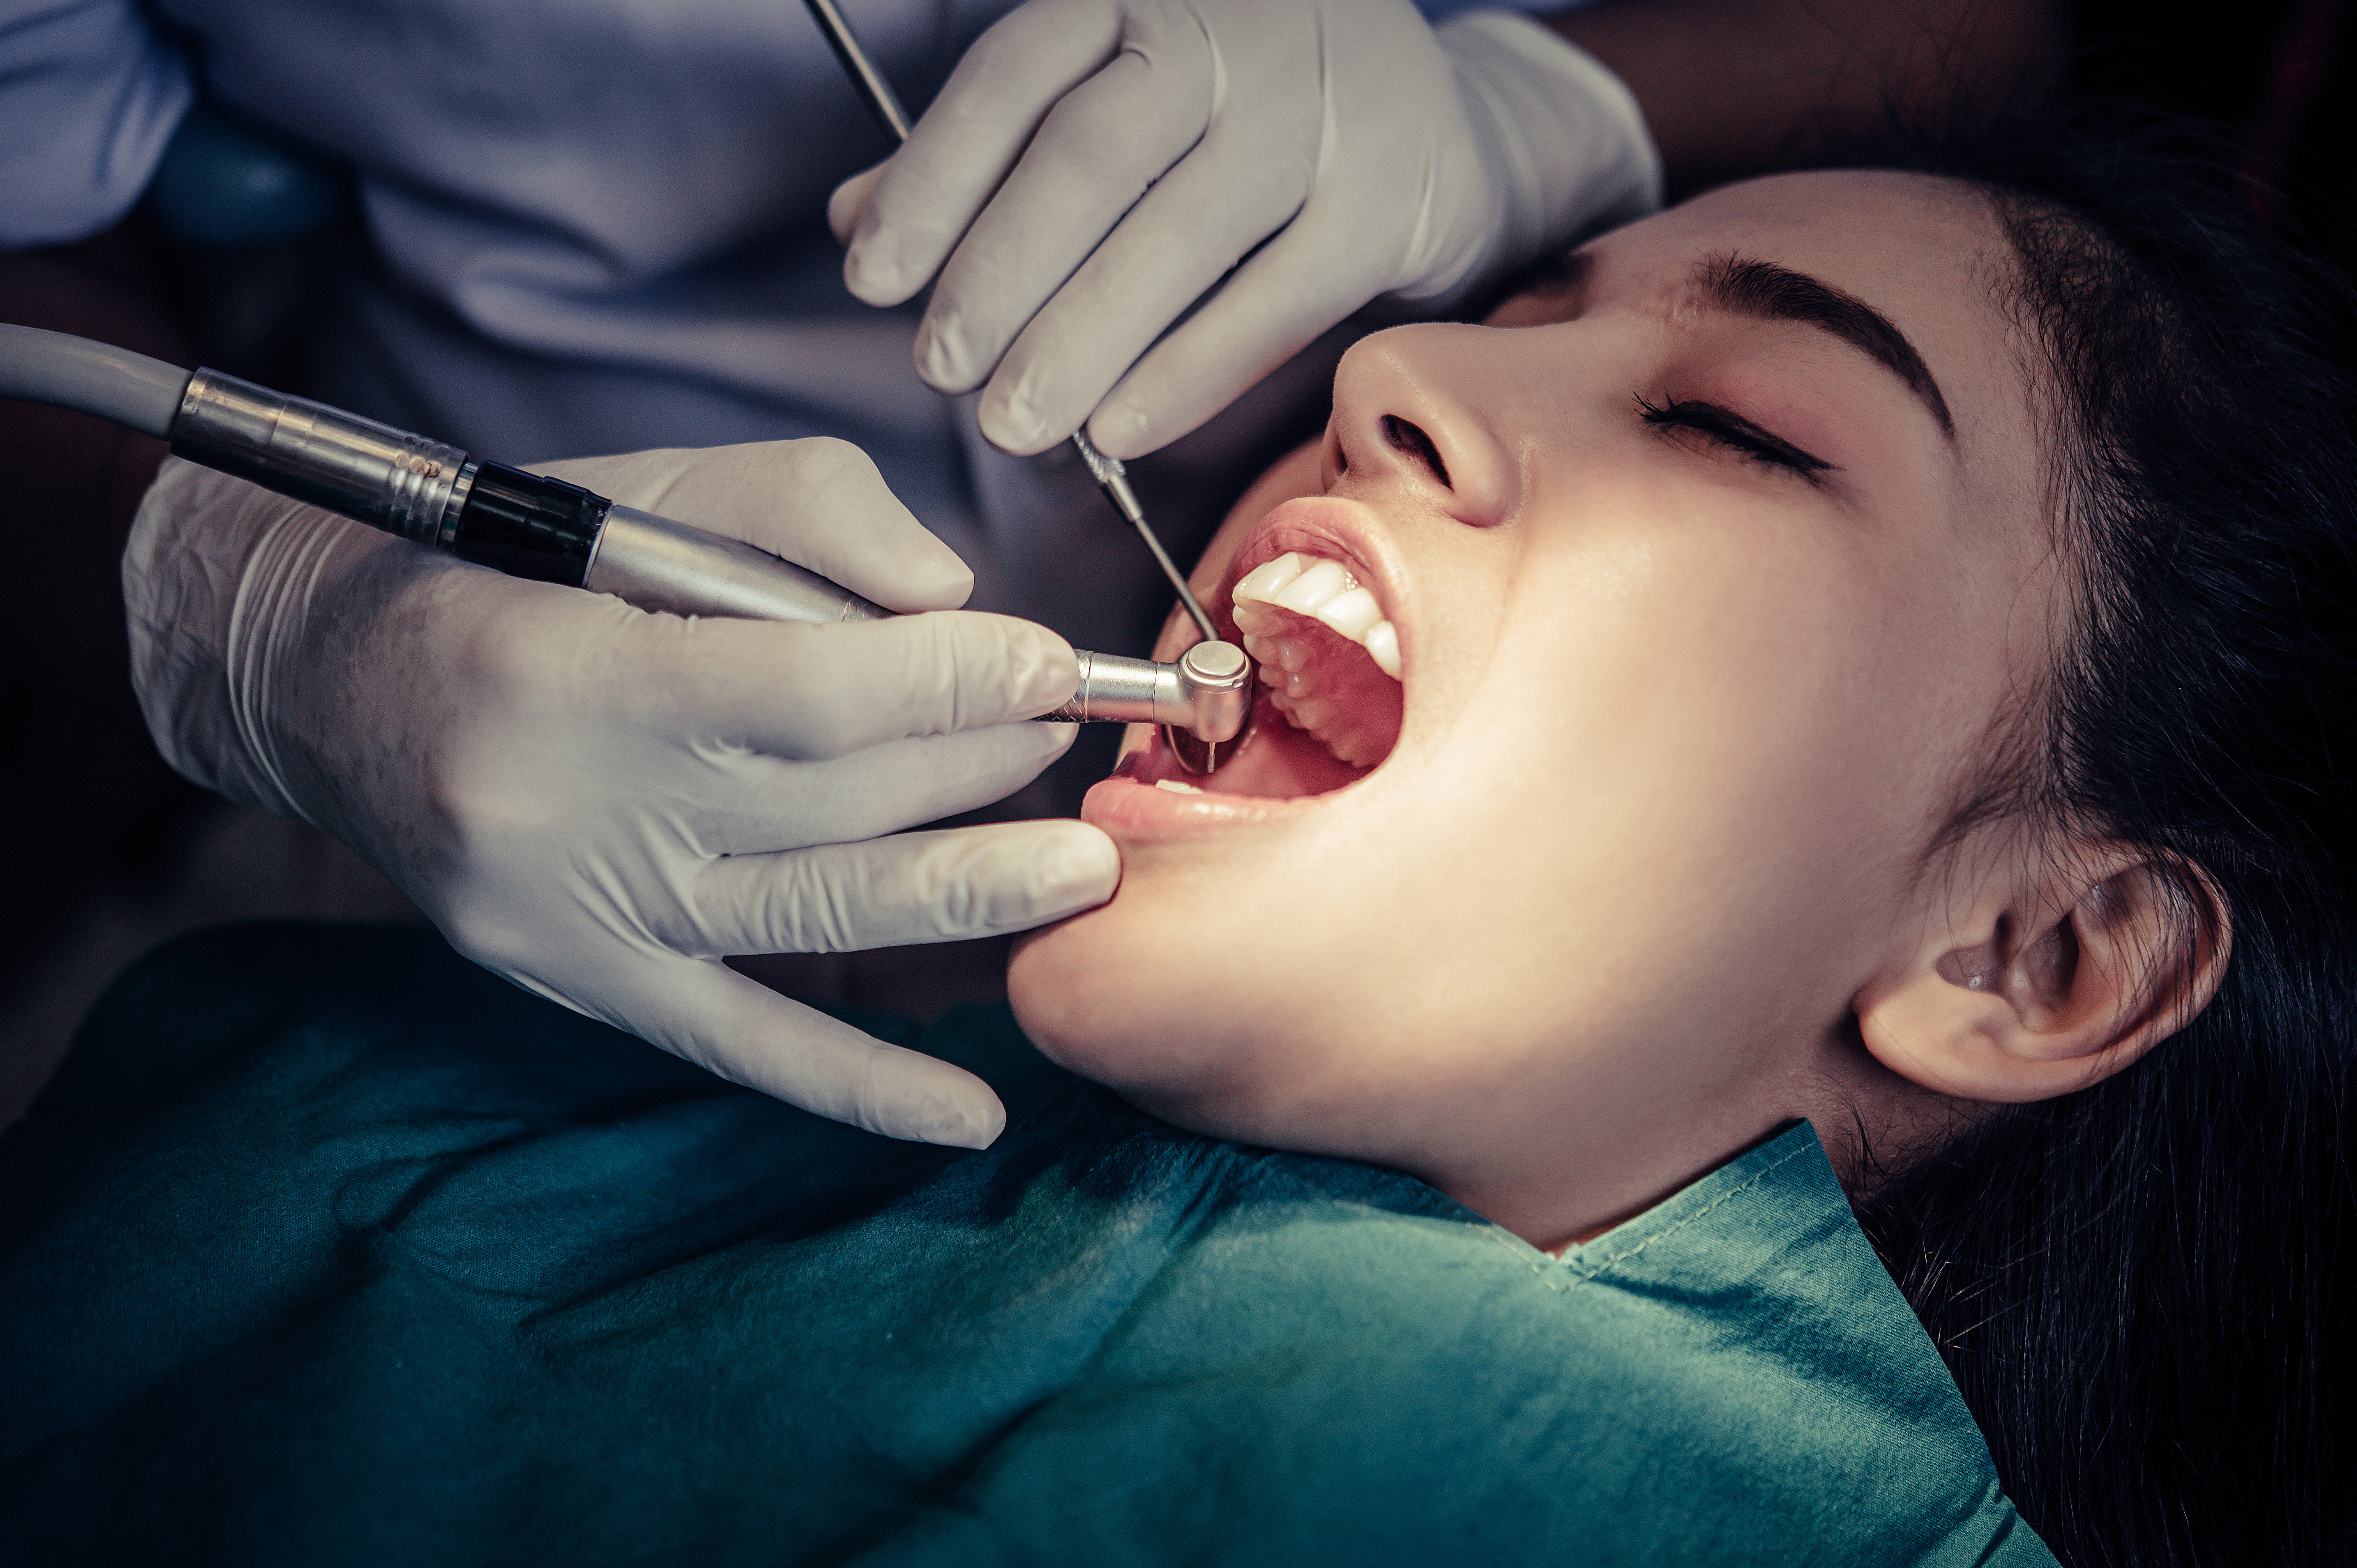 Teeth Extractions in pune